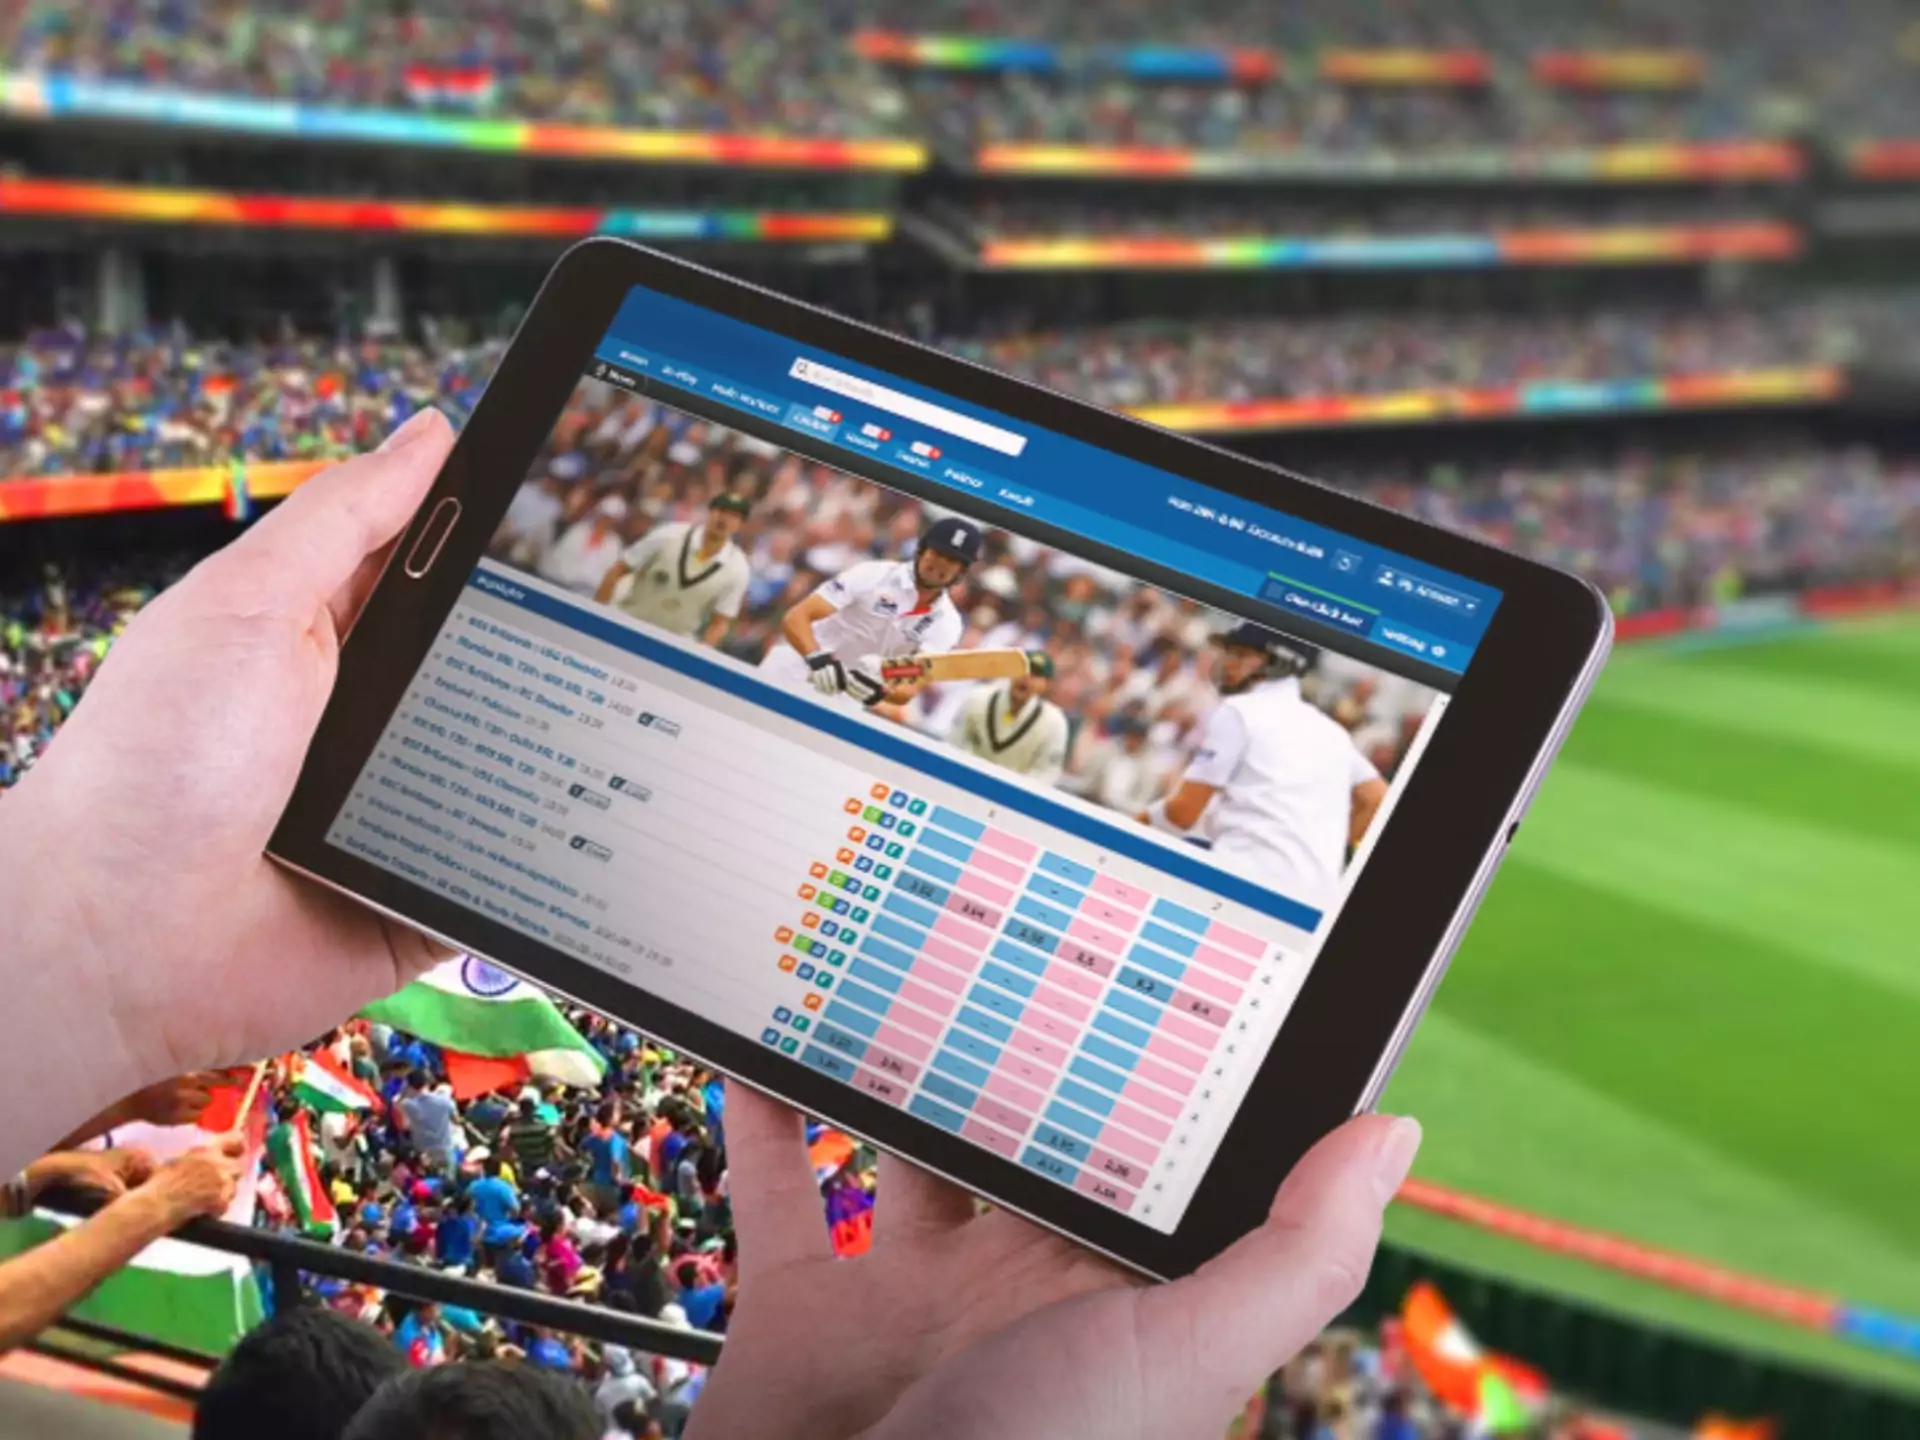 cricket betting india betLike An Expert. Follow These 5 Steps To Get There